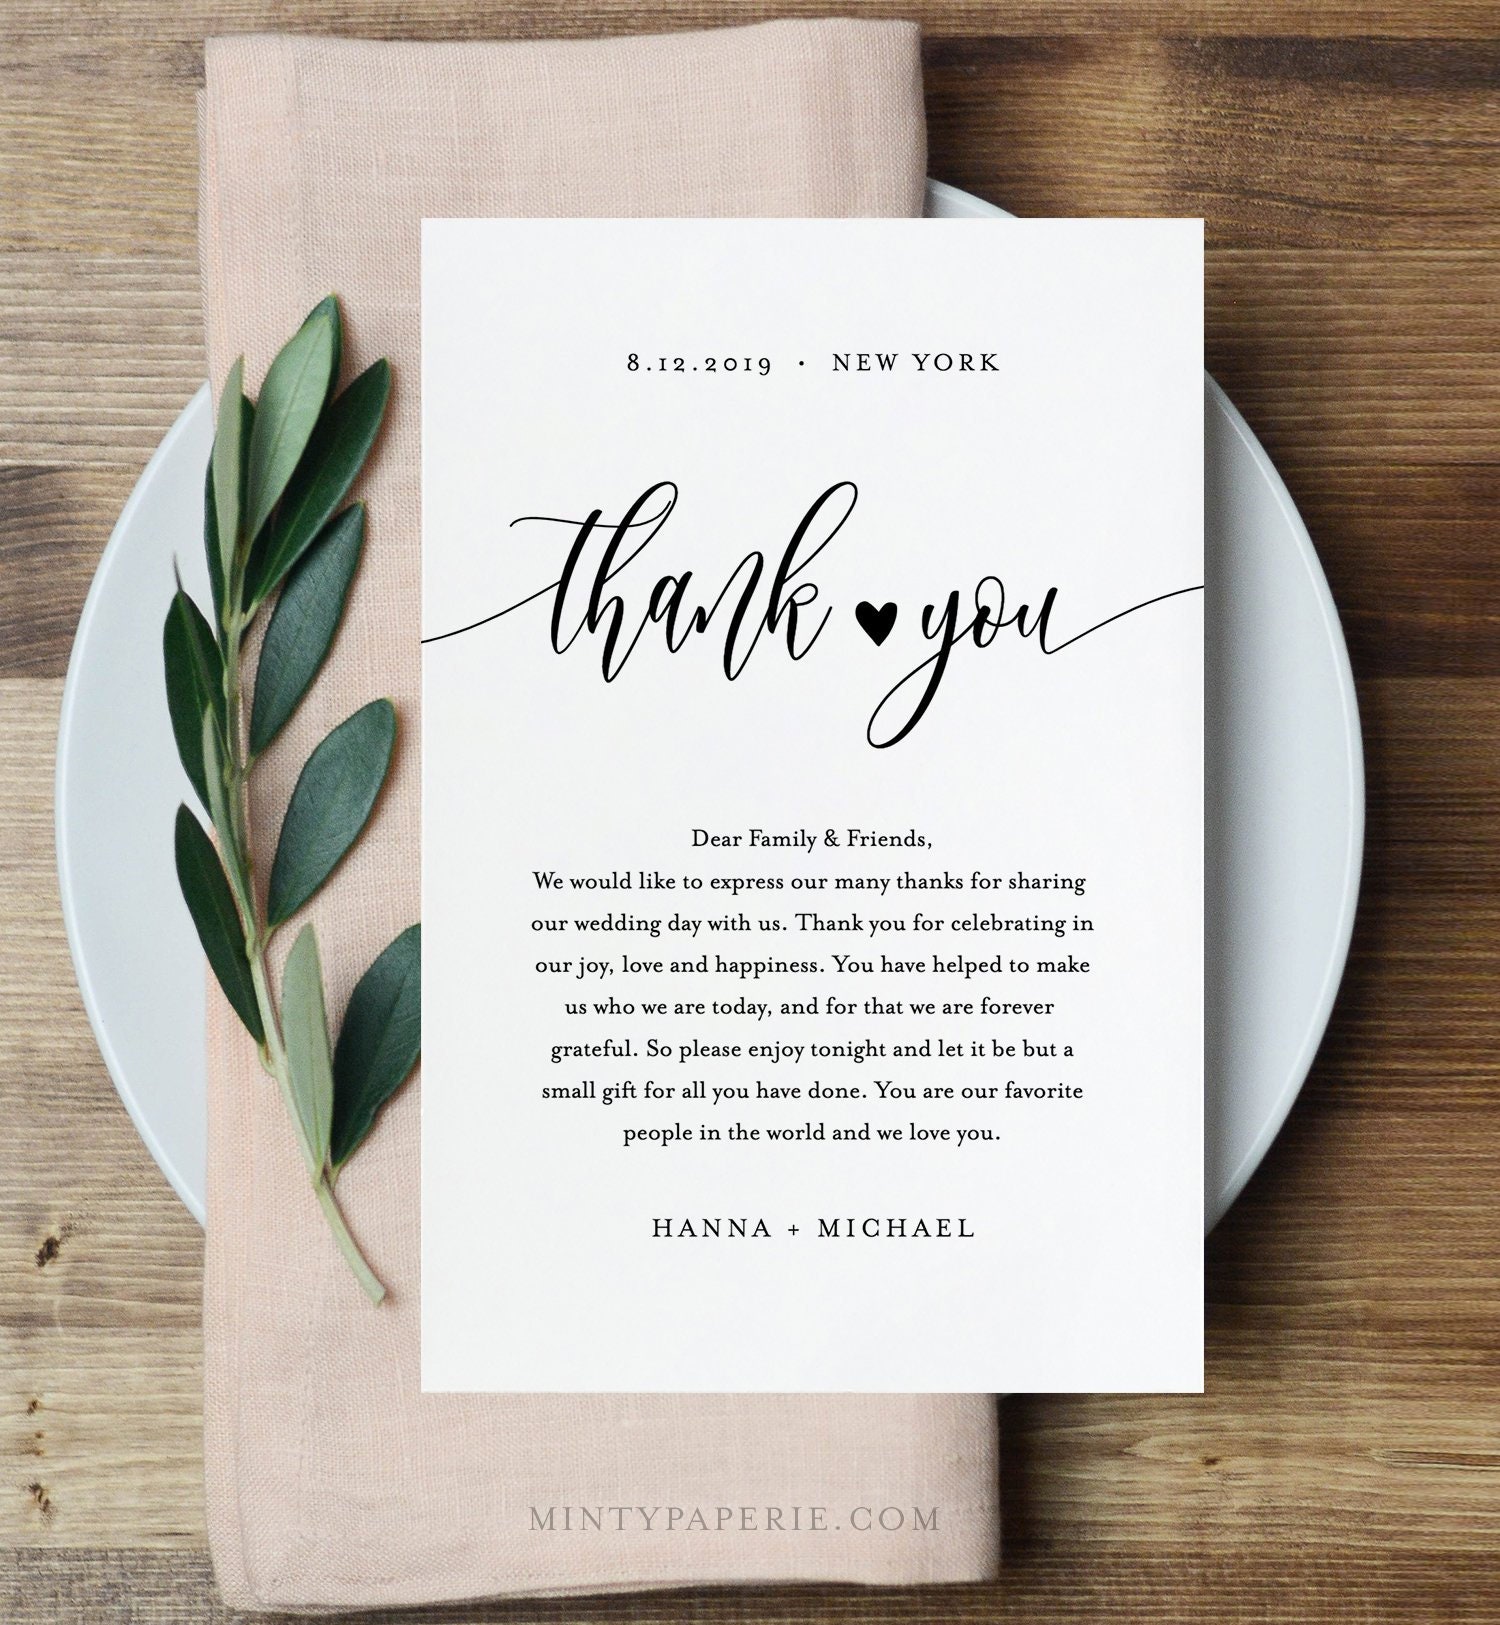 Thank You Note Template, Rustic Wedding In Lieu of Favor ...